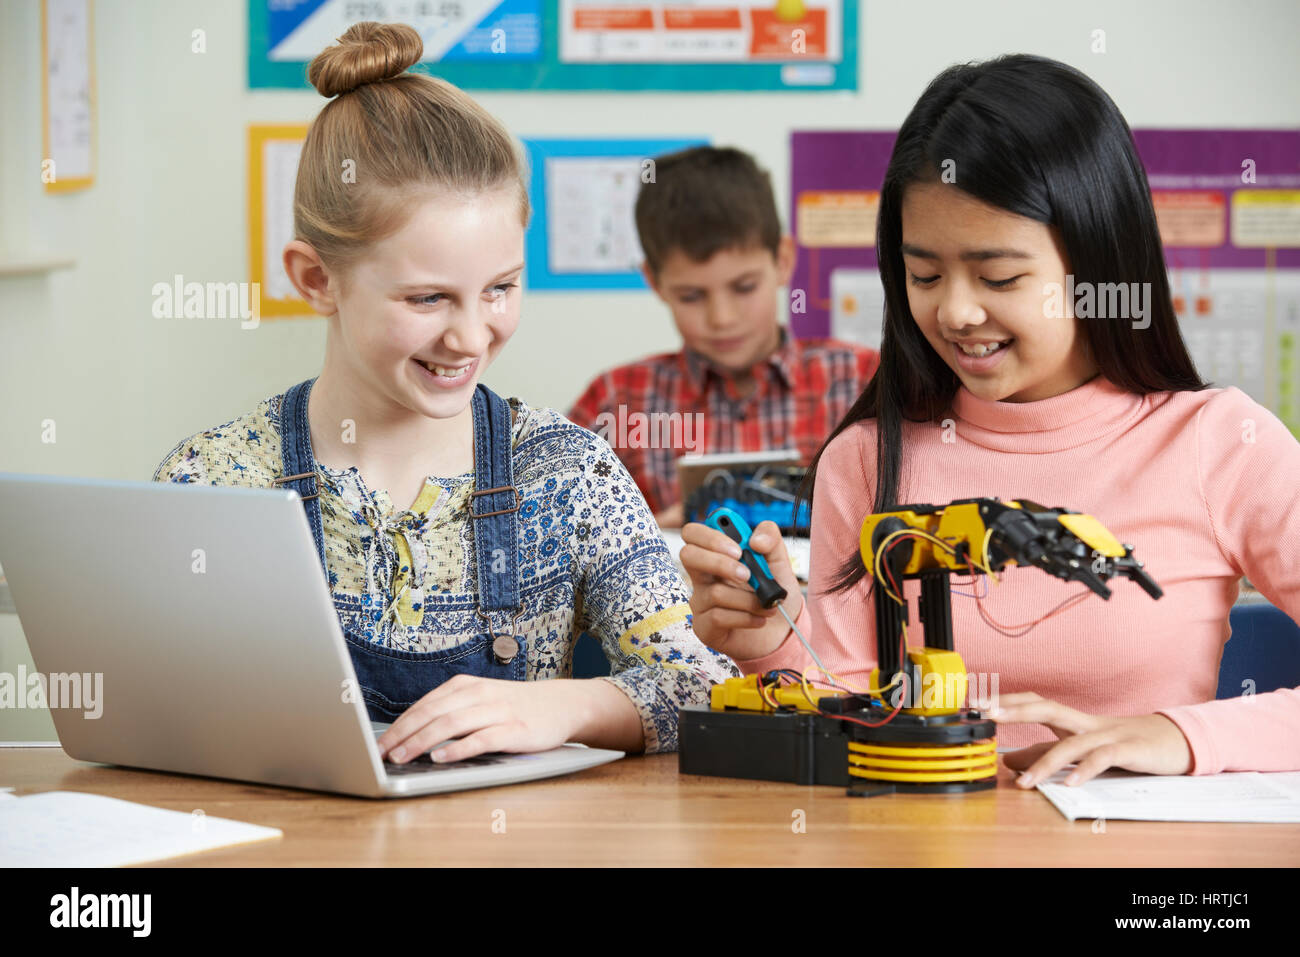 Pupils In Science Lesson Studying Robotics Stock Photo